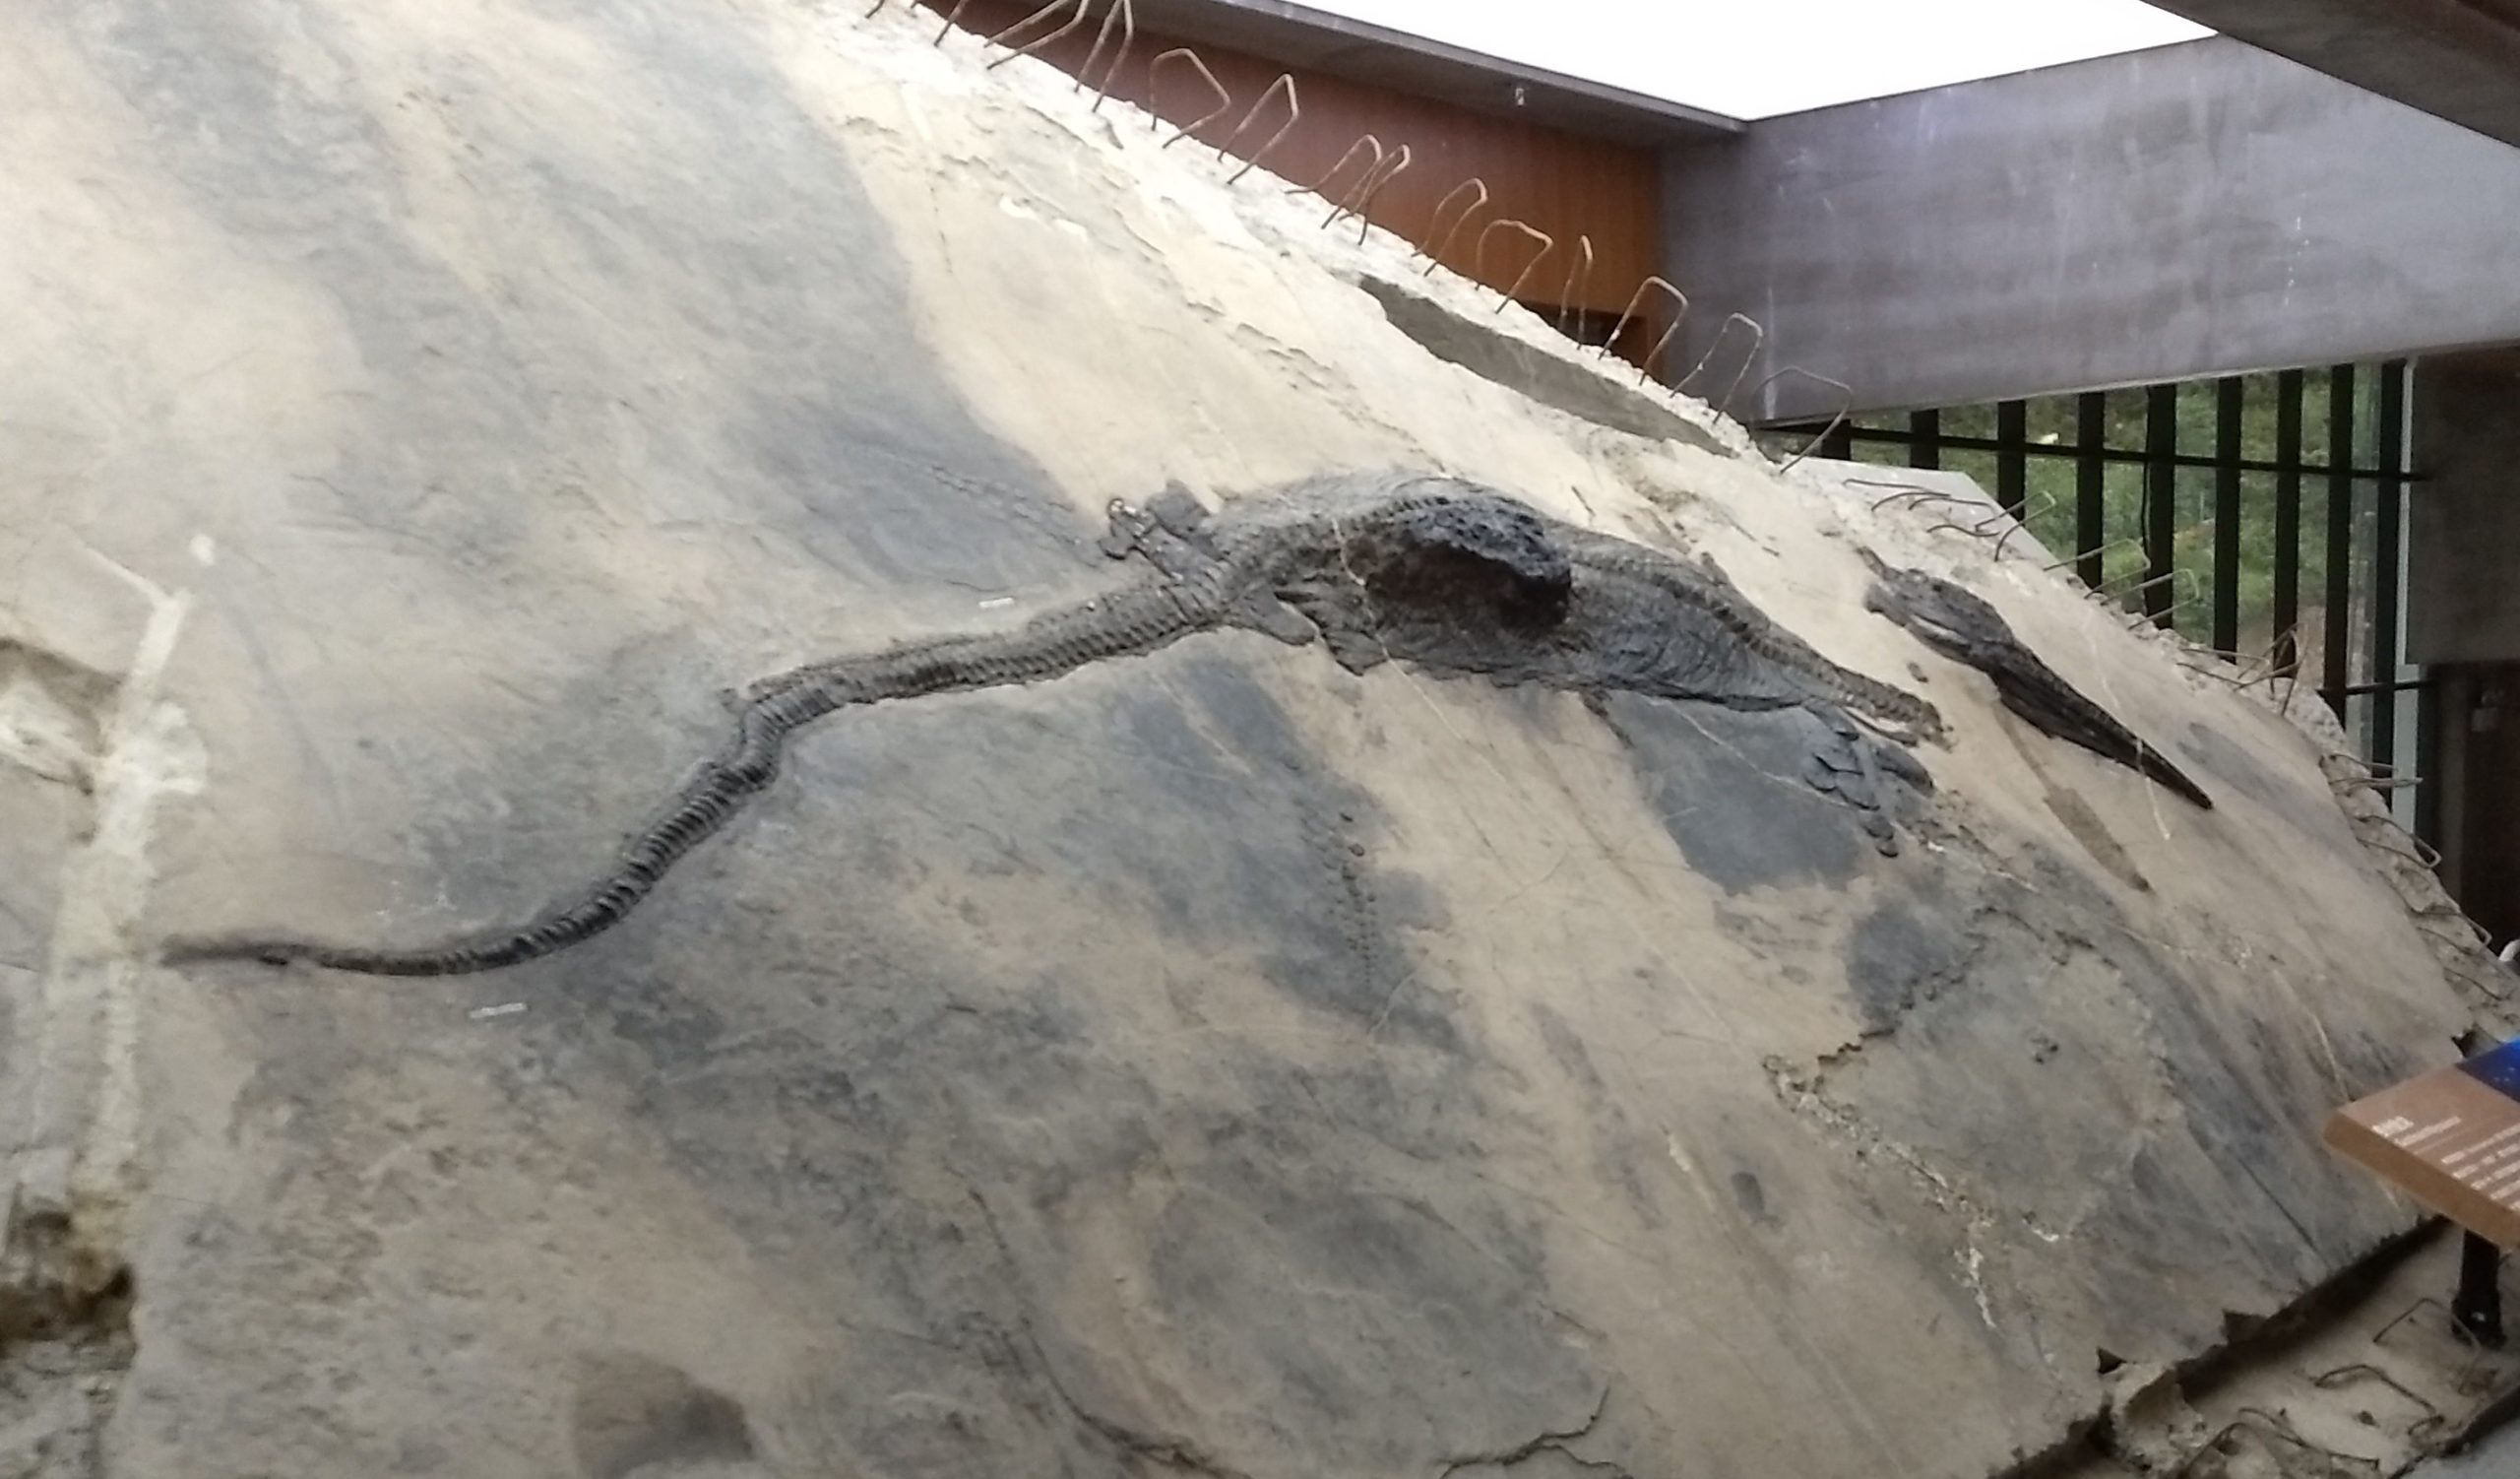 The ichthyosaur specimen with its stomach contents visible as a bodily protrusion. (Image: Ryosuke Motani)